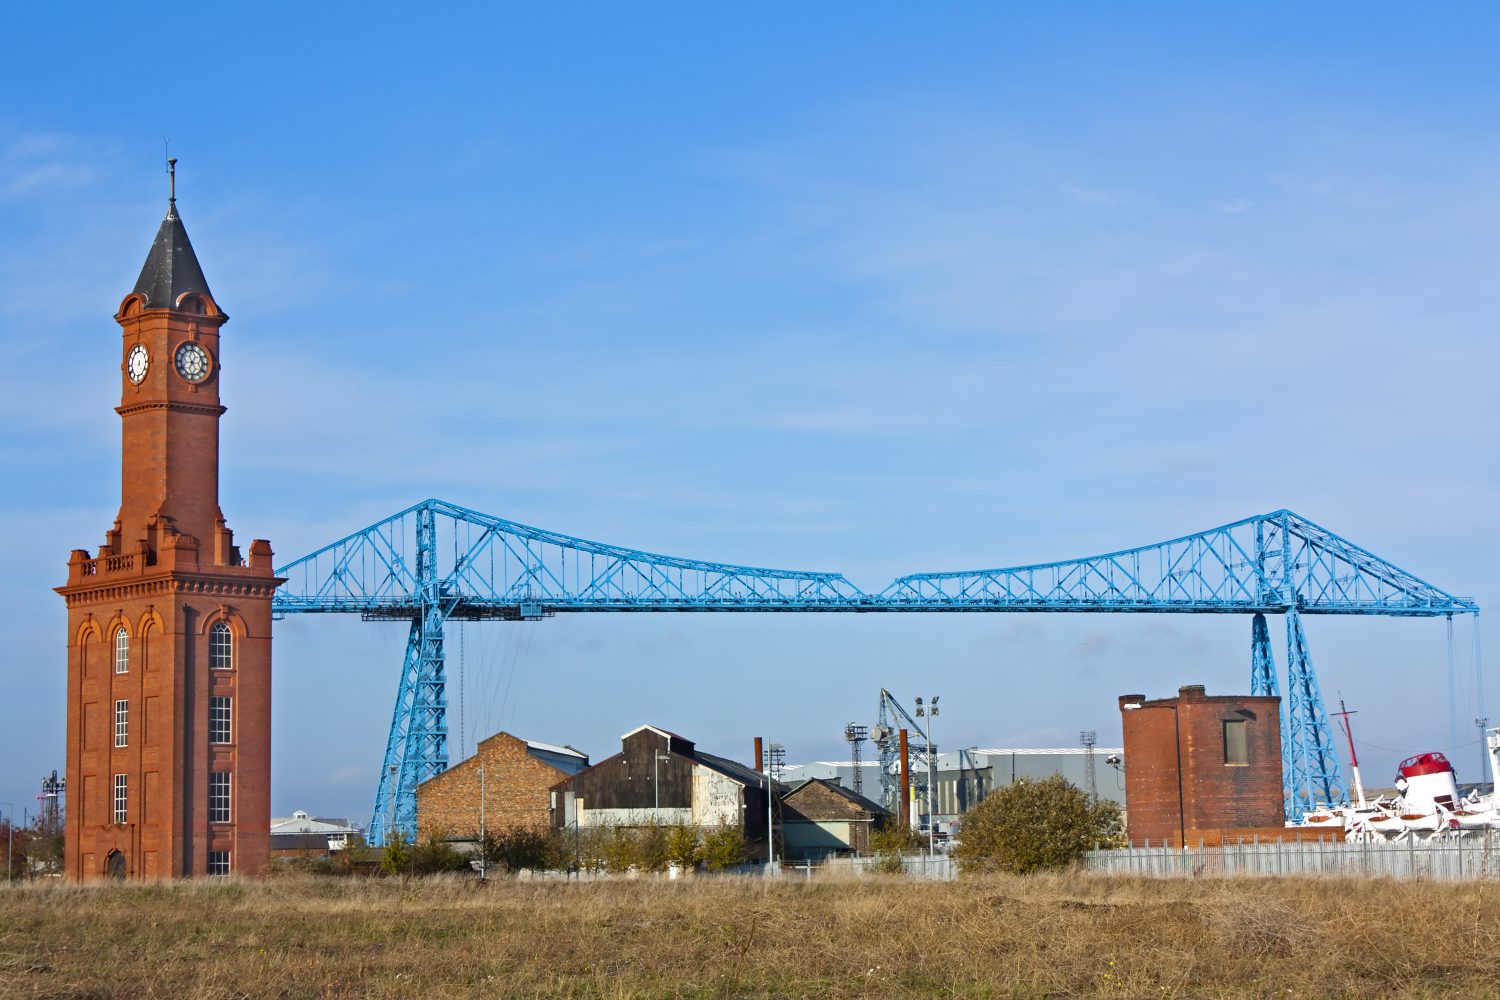 Landscape scene including a tower and blue industrial bridge.